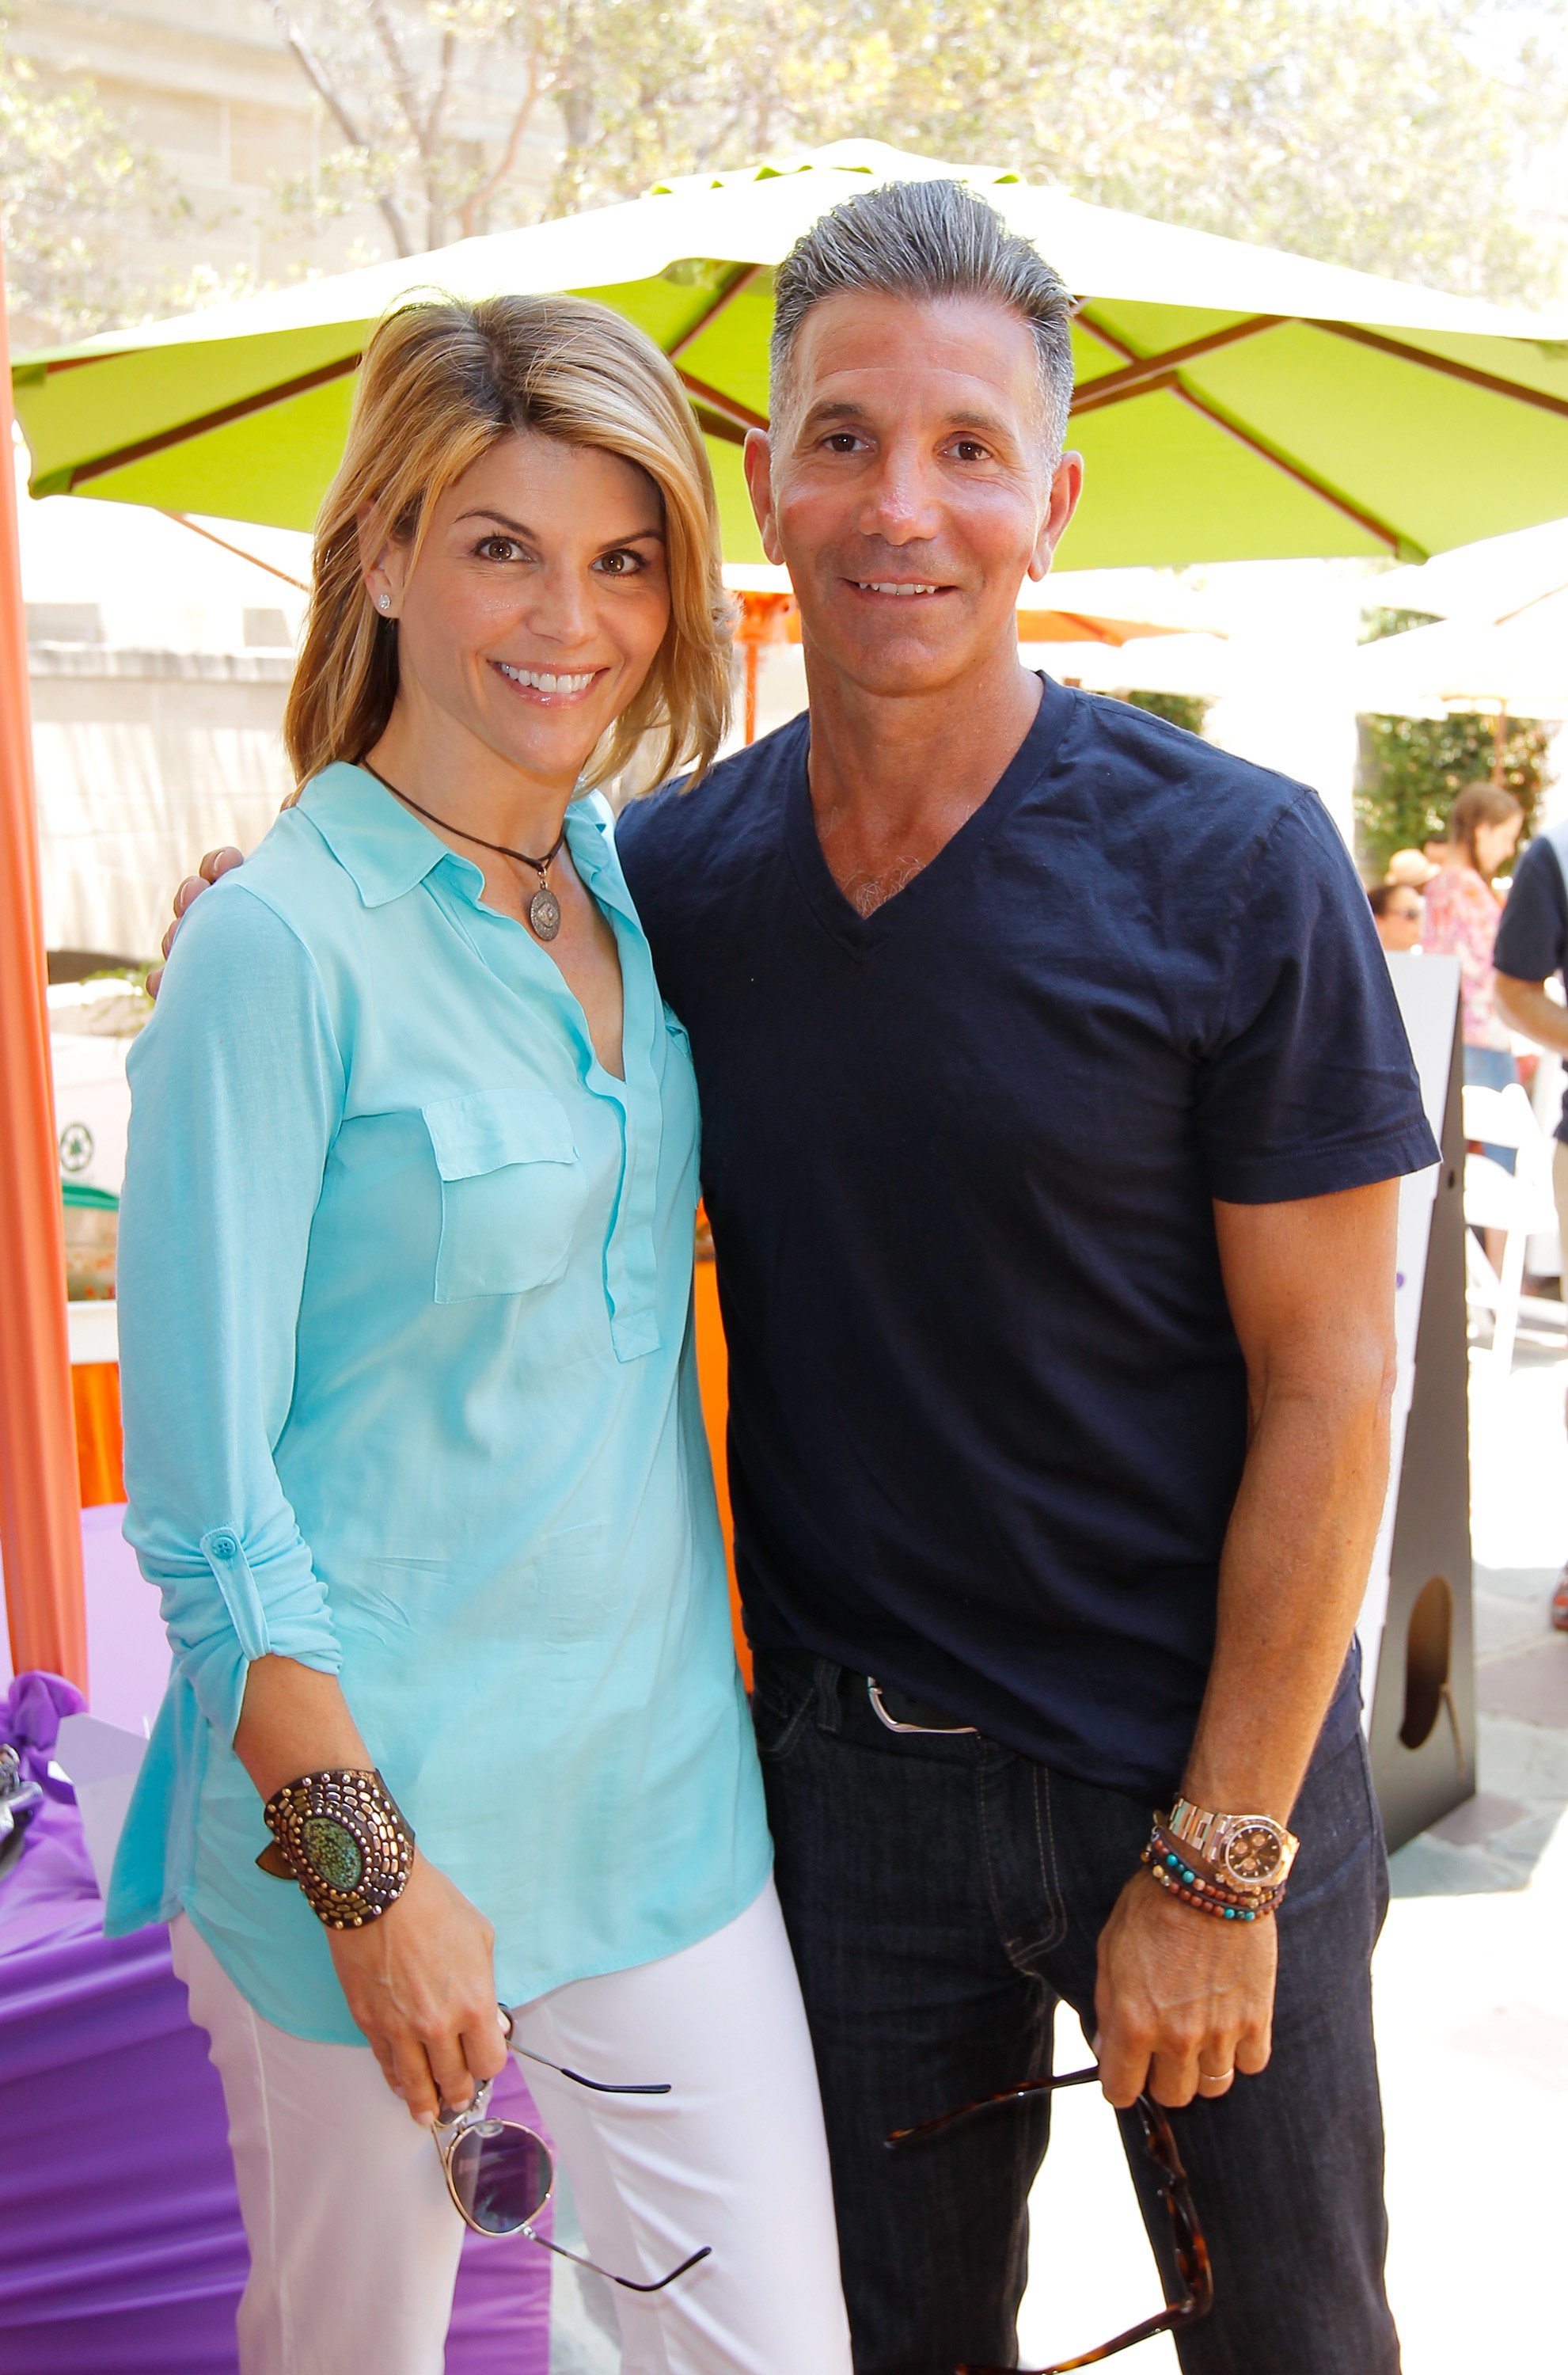 Lori Loughlin and husband Mossimo Giannulli attend 6th Annual Kidstock Music And Arts Festival at Greystone Mansion on June 3, 2012 in Beverly Hills, California | Photo: Getty Images